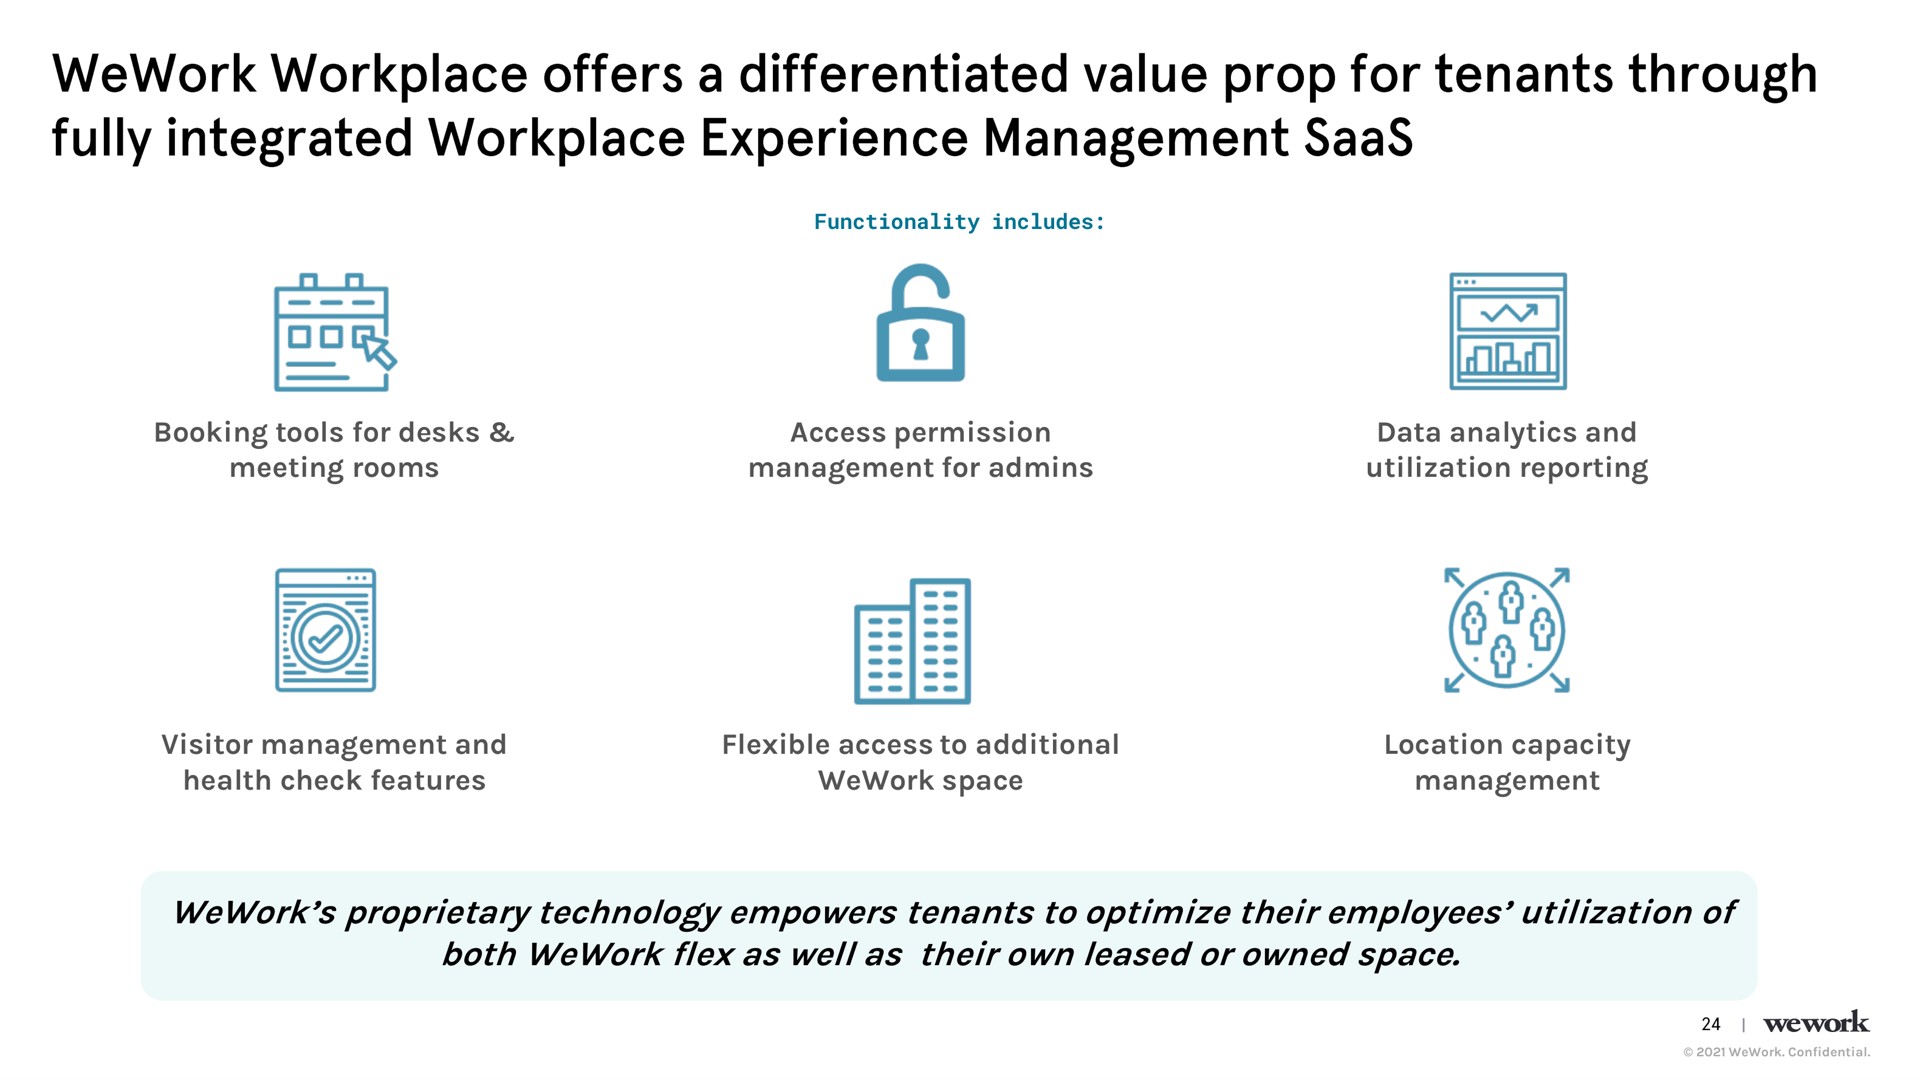 proprietary technology empowers tenants to optimize their employees utilization of both flex as well as their own leased or owned space workplace offers a differentiated value prop for through fully integrated workplace experience management | WeWork